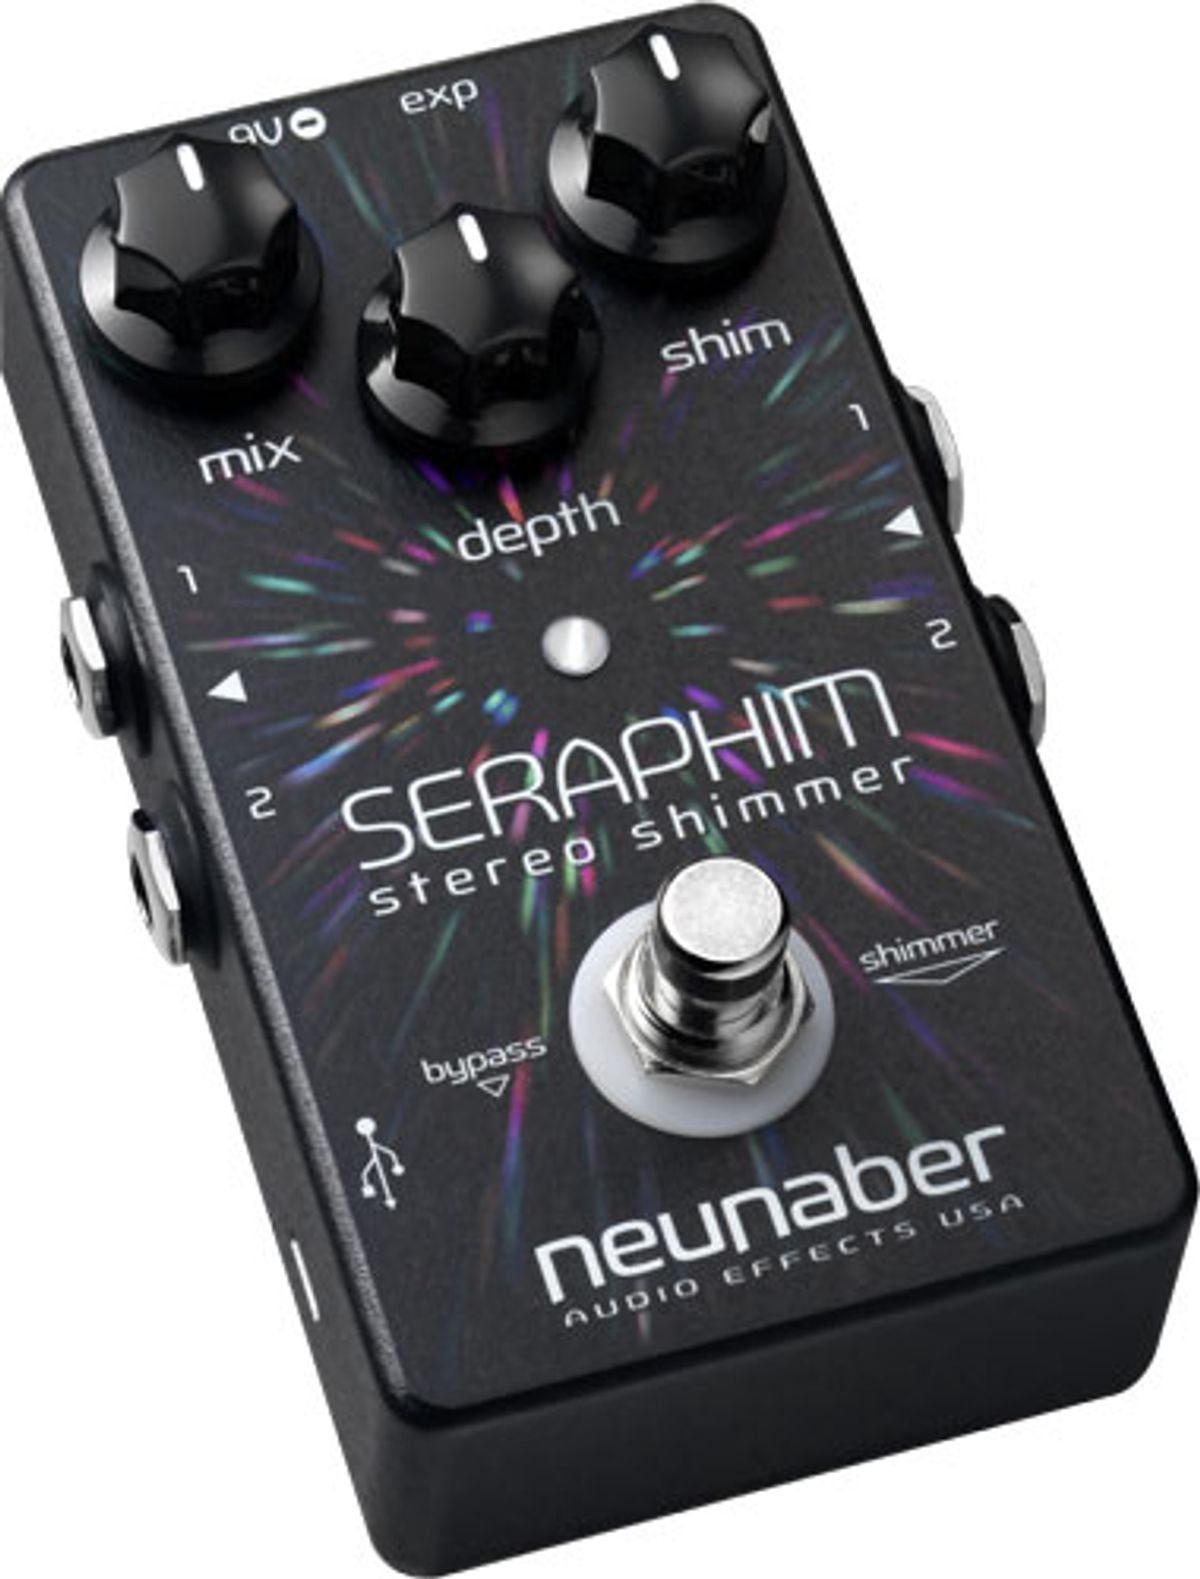 Neunaber Audio Effects Announces the Seraphim Stereo Shimmer Pedal